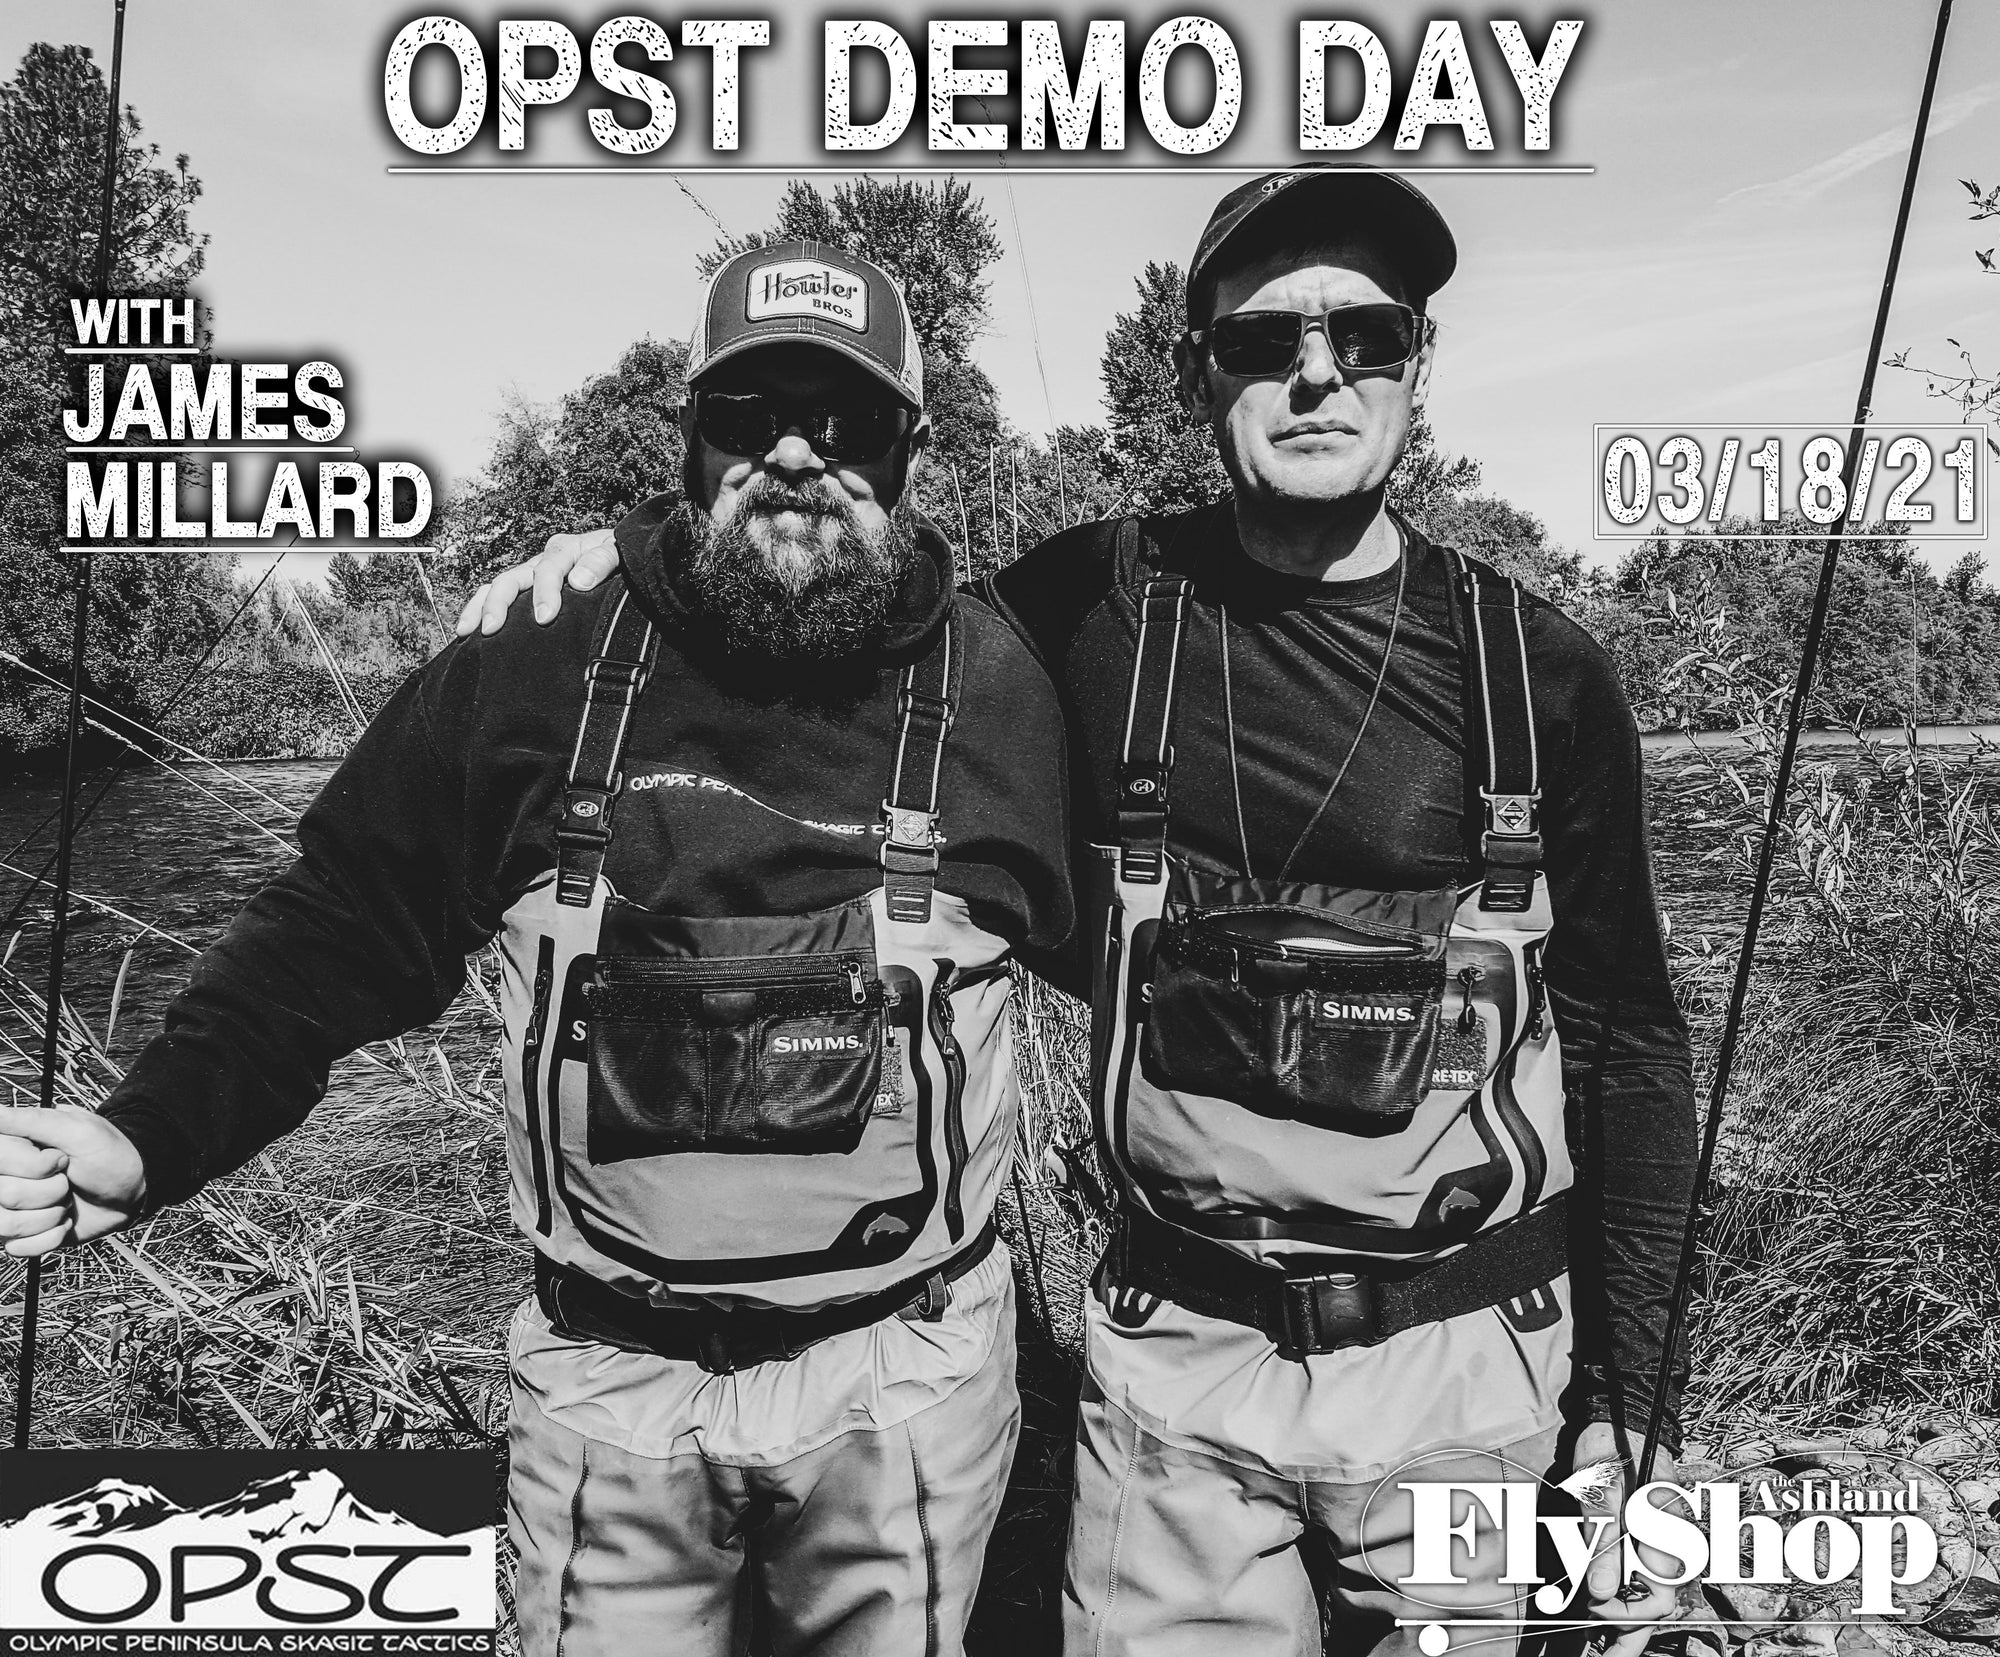 OPST Demo Day with James Millard